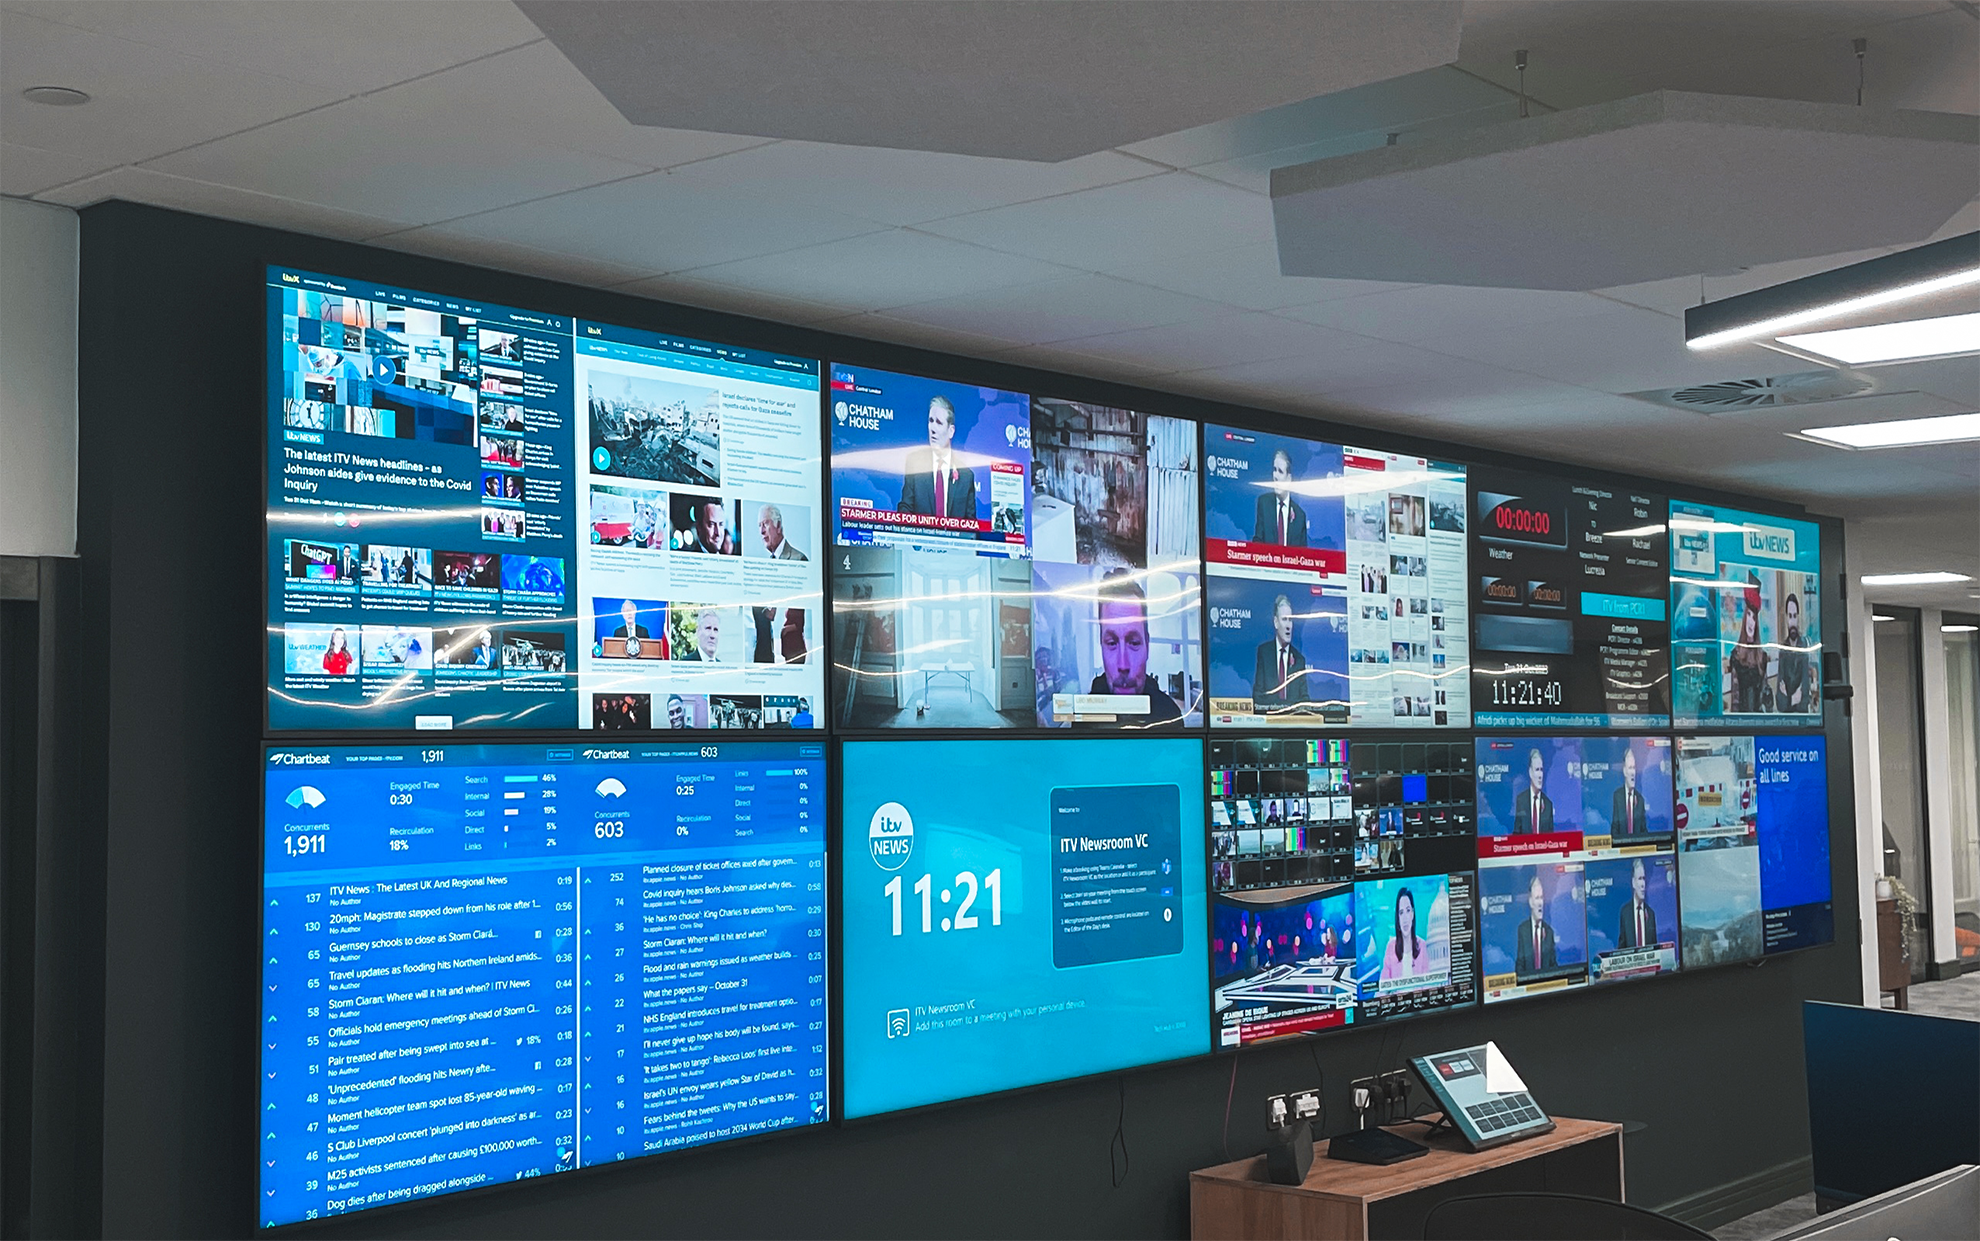 Thumbnail for Managing Video Walls, Digital Signage with Datapath and Densitron